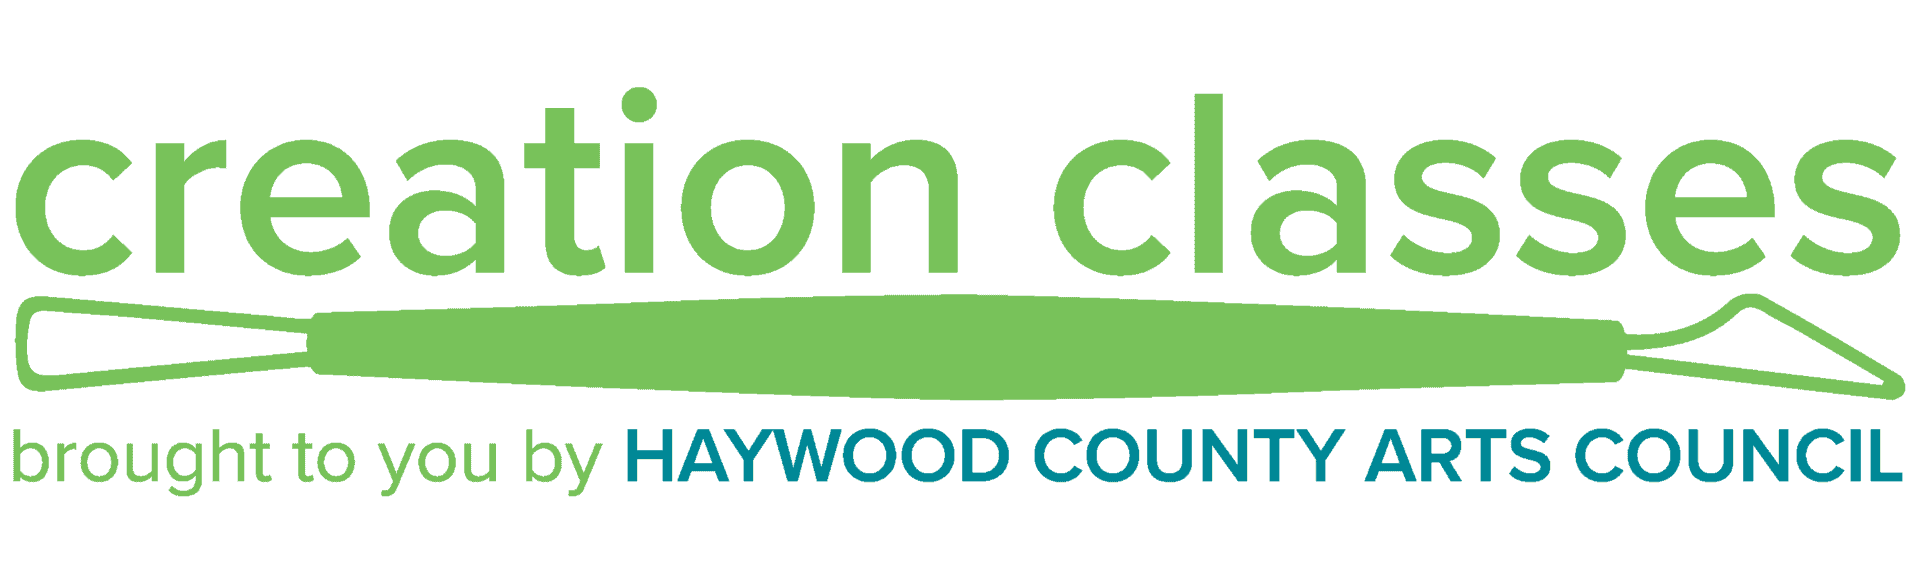 Creation Classes brought to you by Haywood County Arts Council